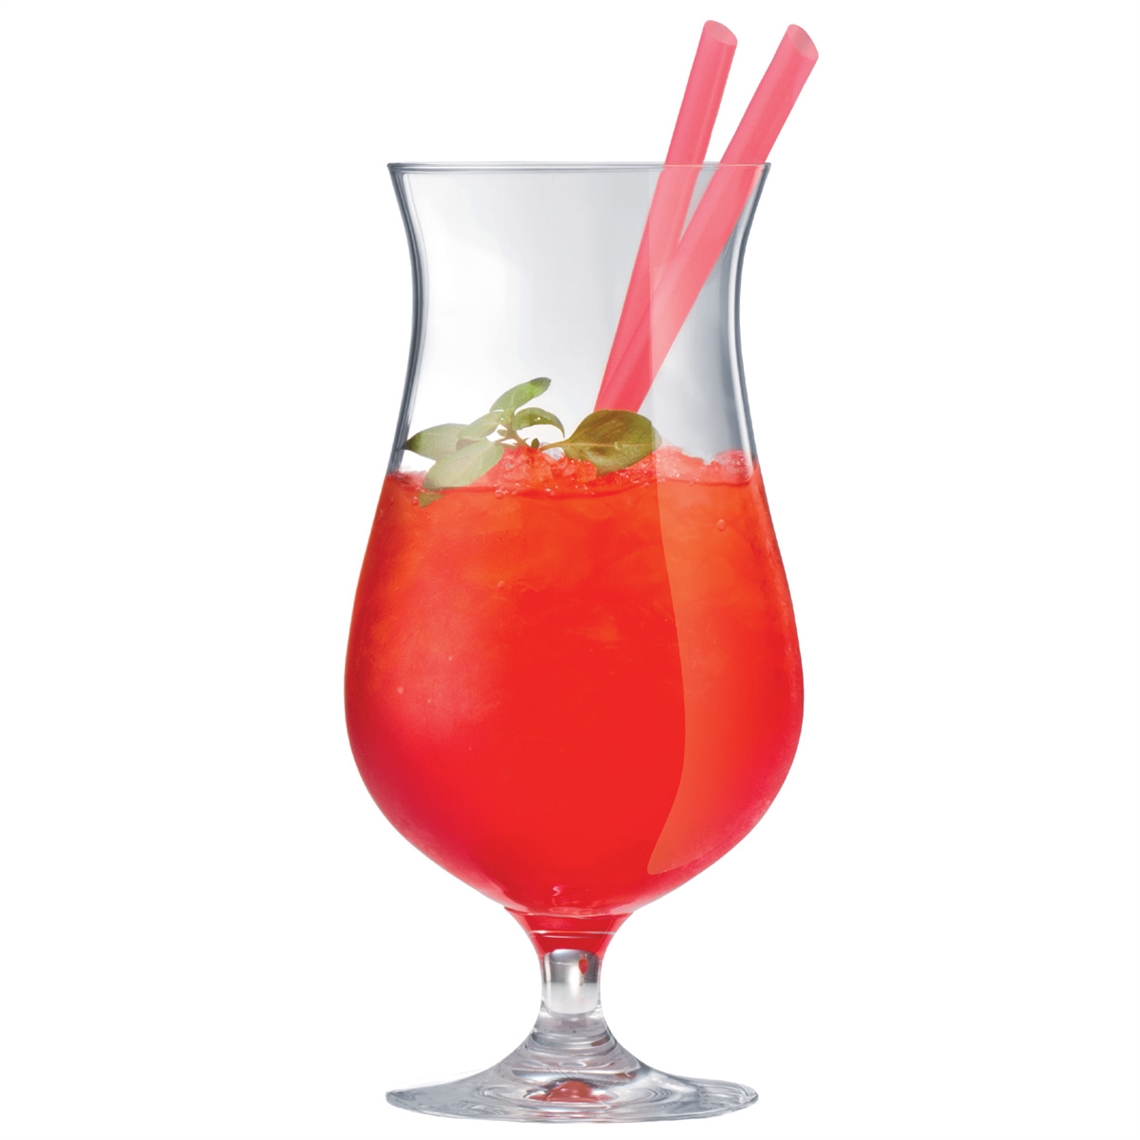 View more restaurant & trade glasses from our Cocktail Glasses range